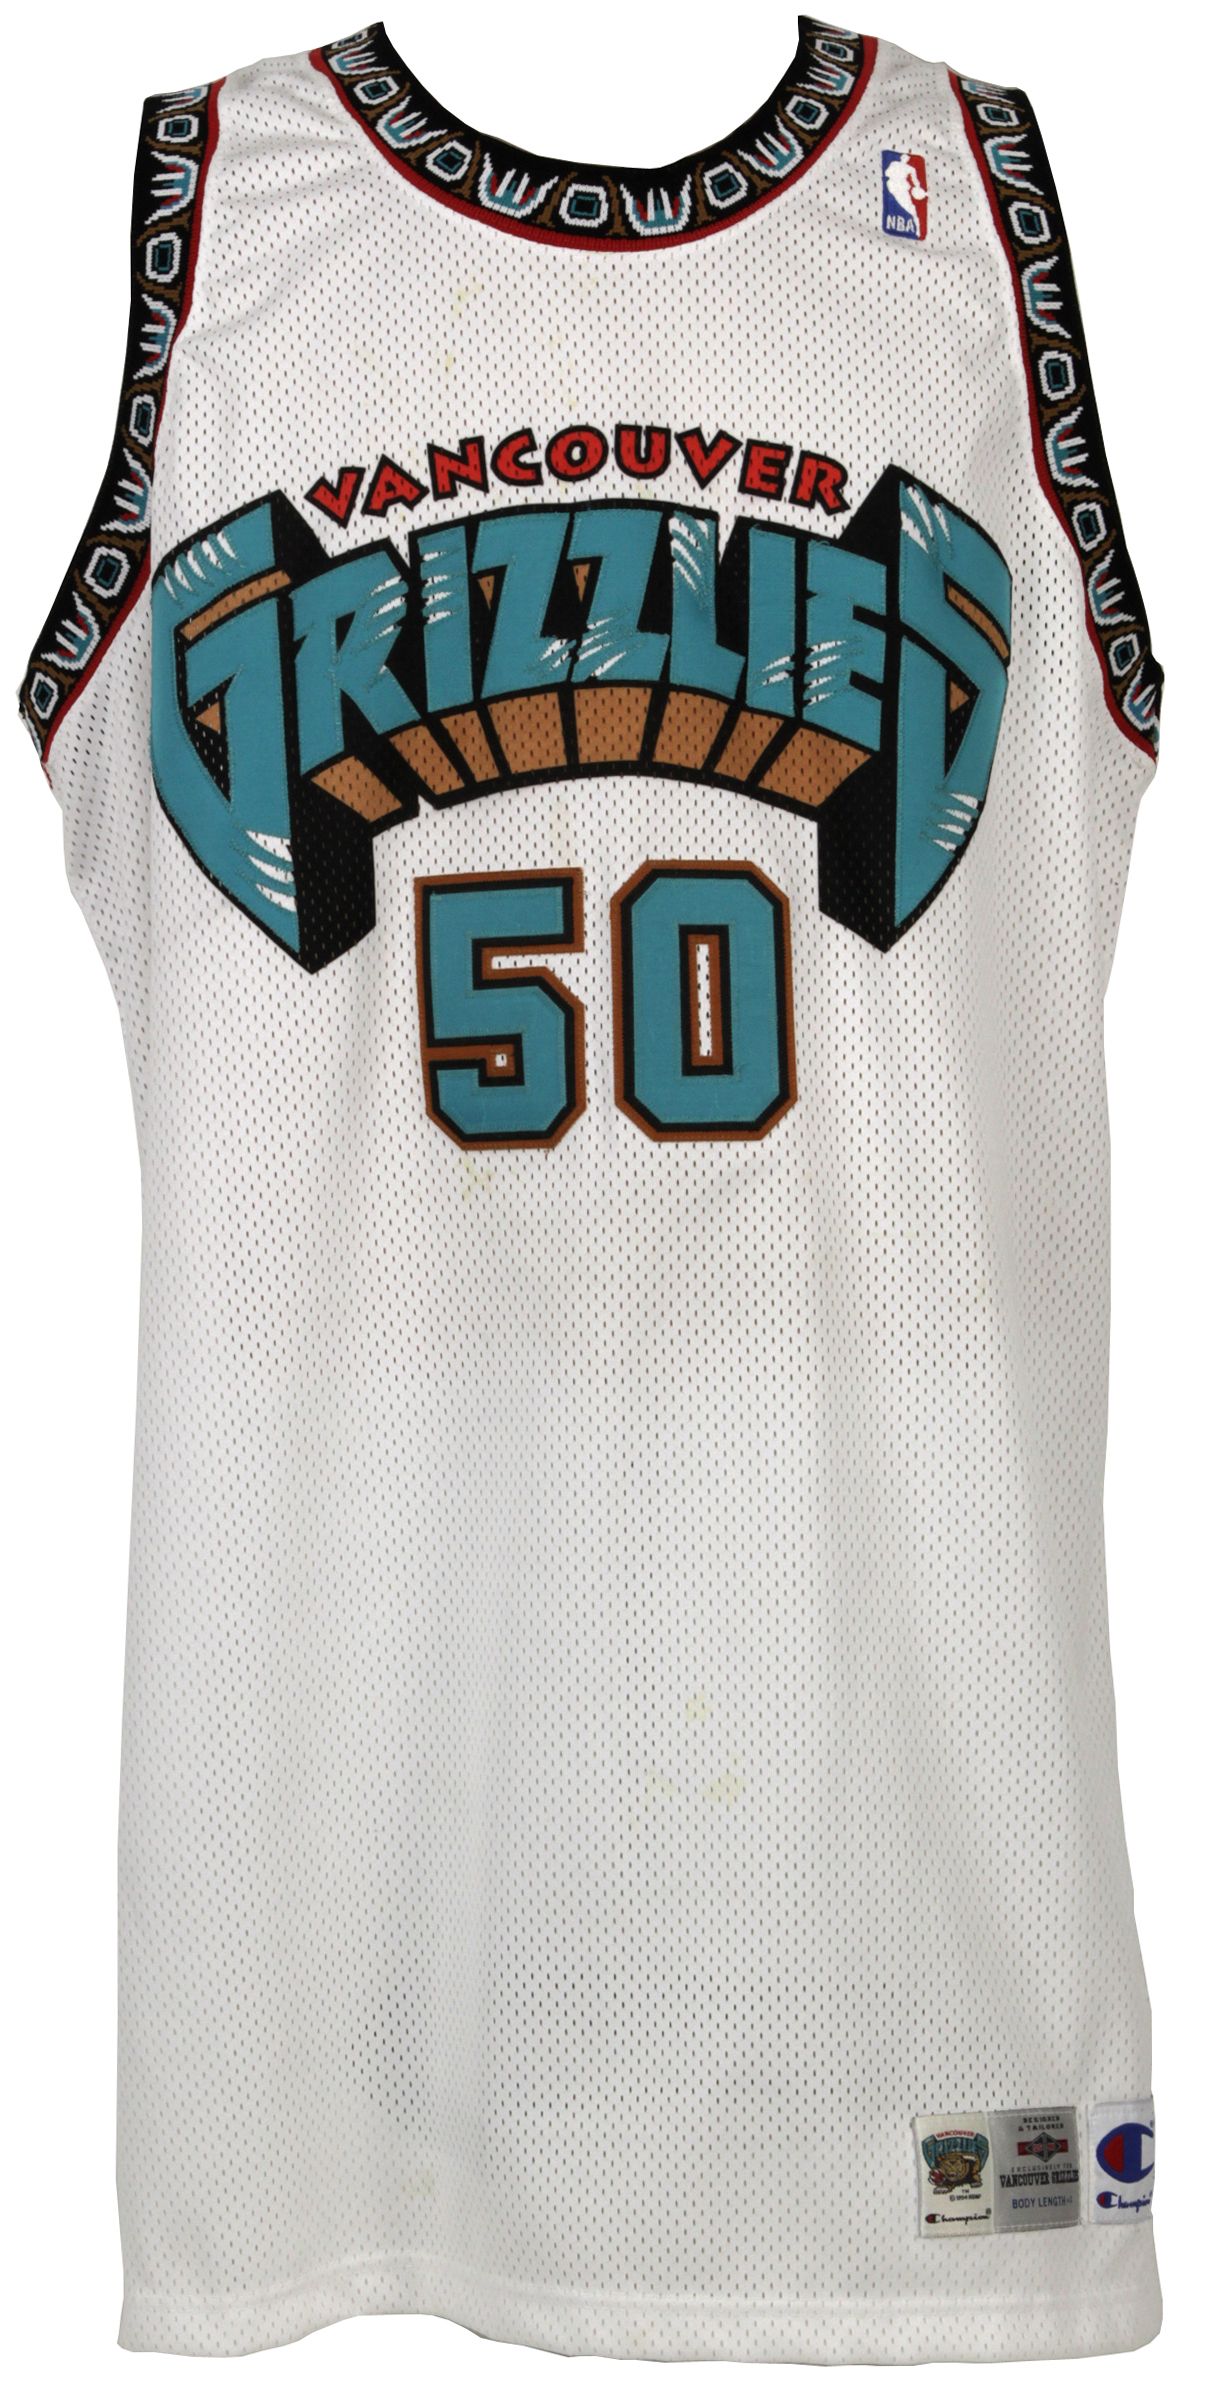 bryant reeves grizzlies jersey